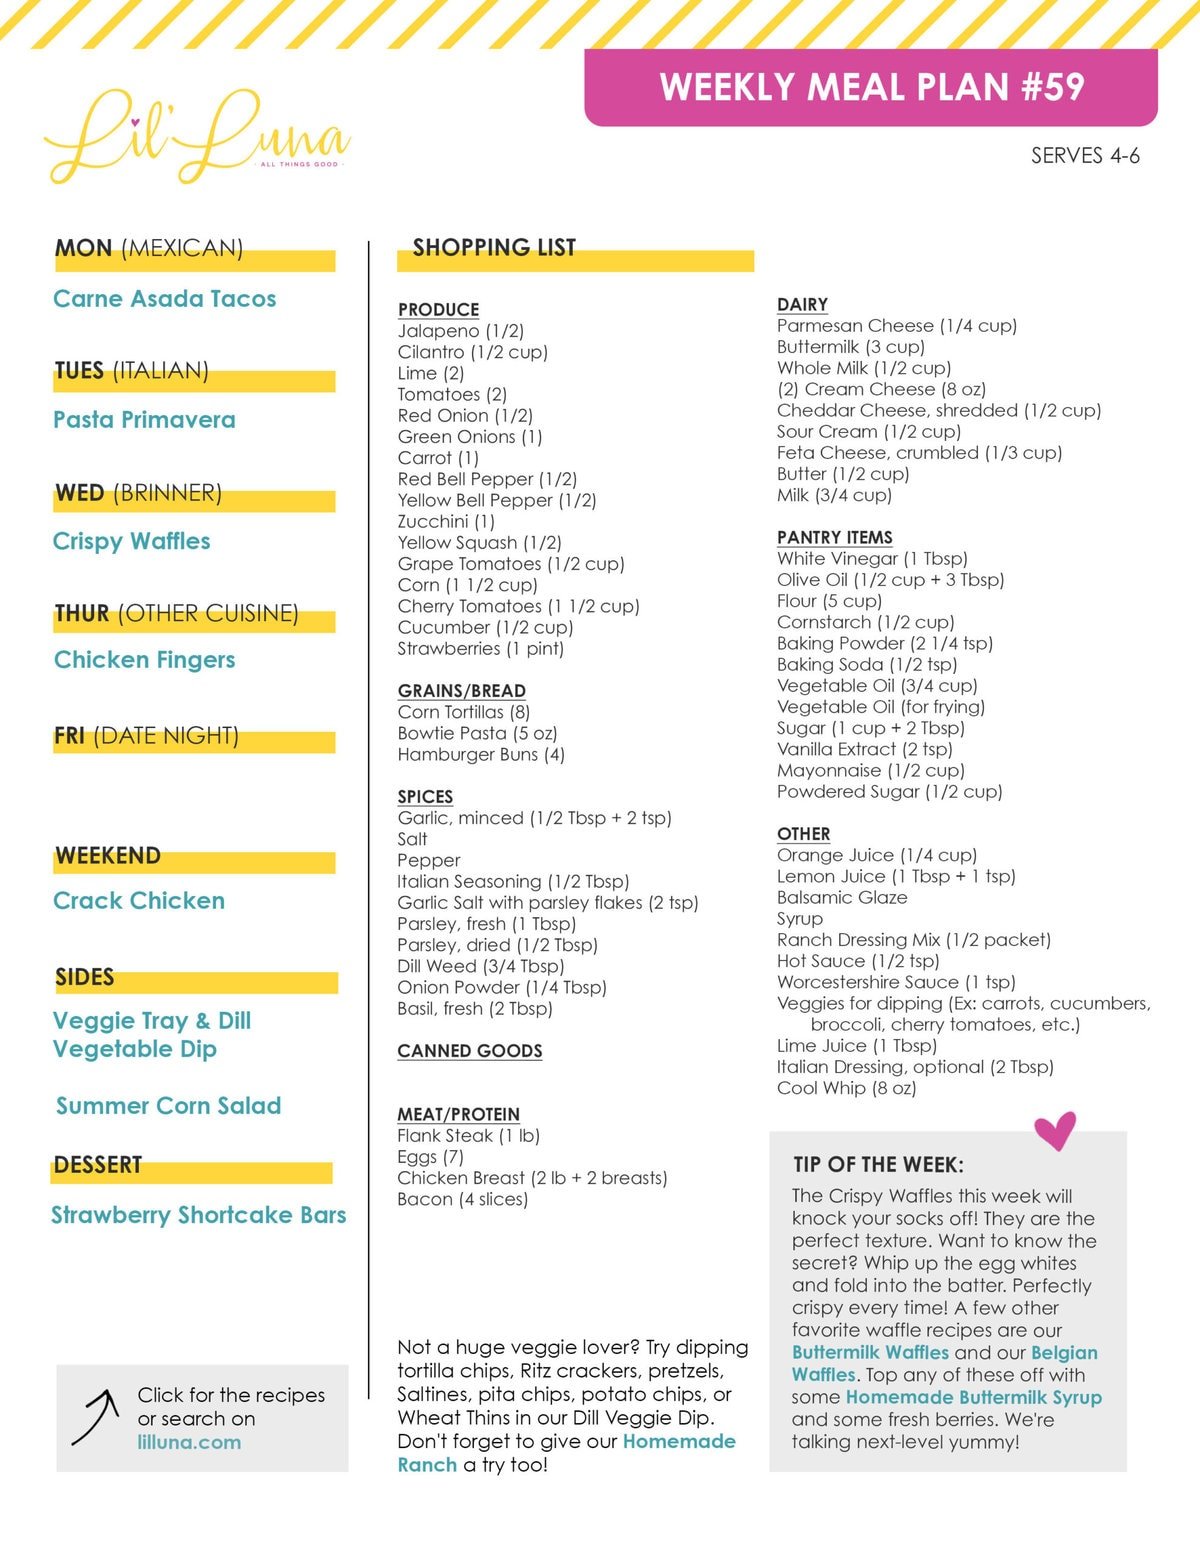 Printable version of Meal Plan #59 with grocery list.